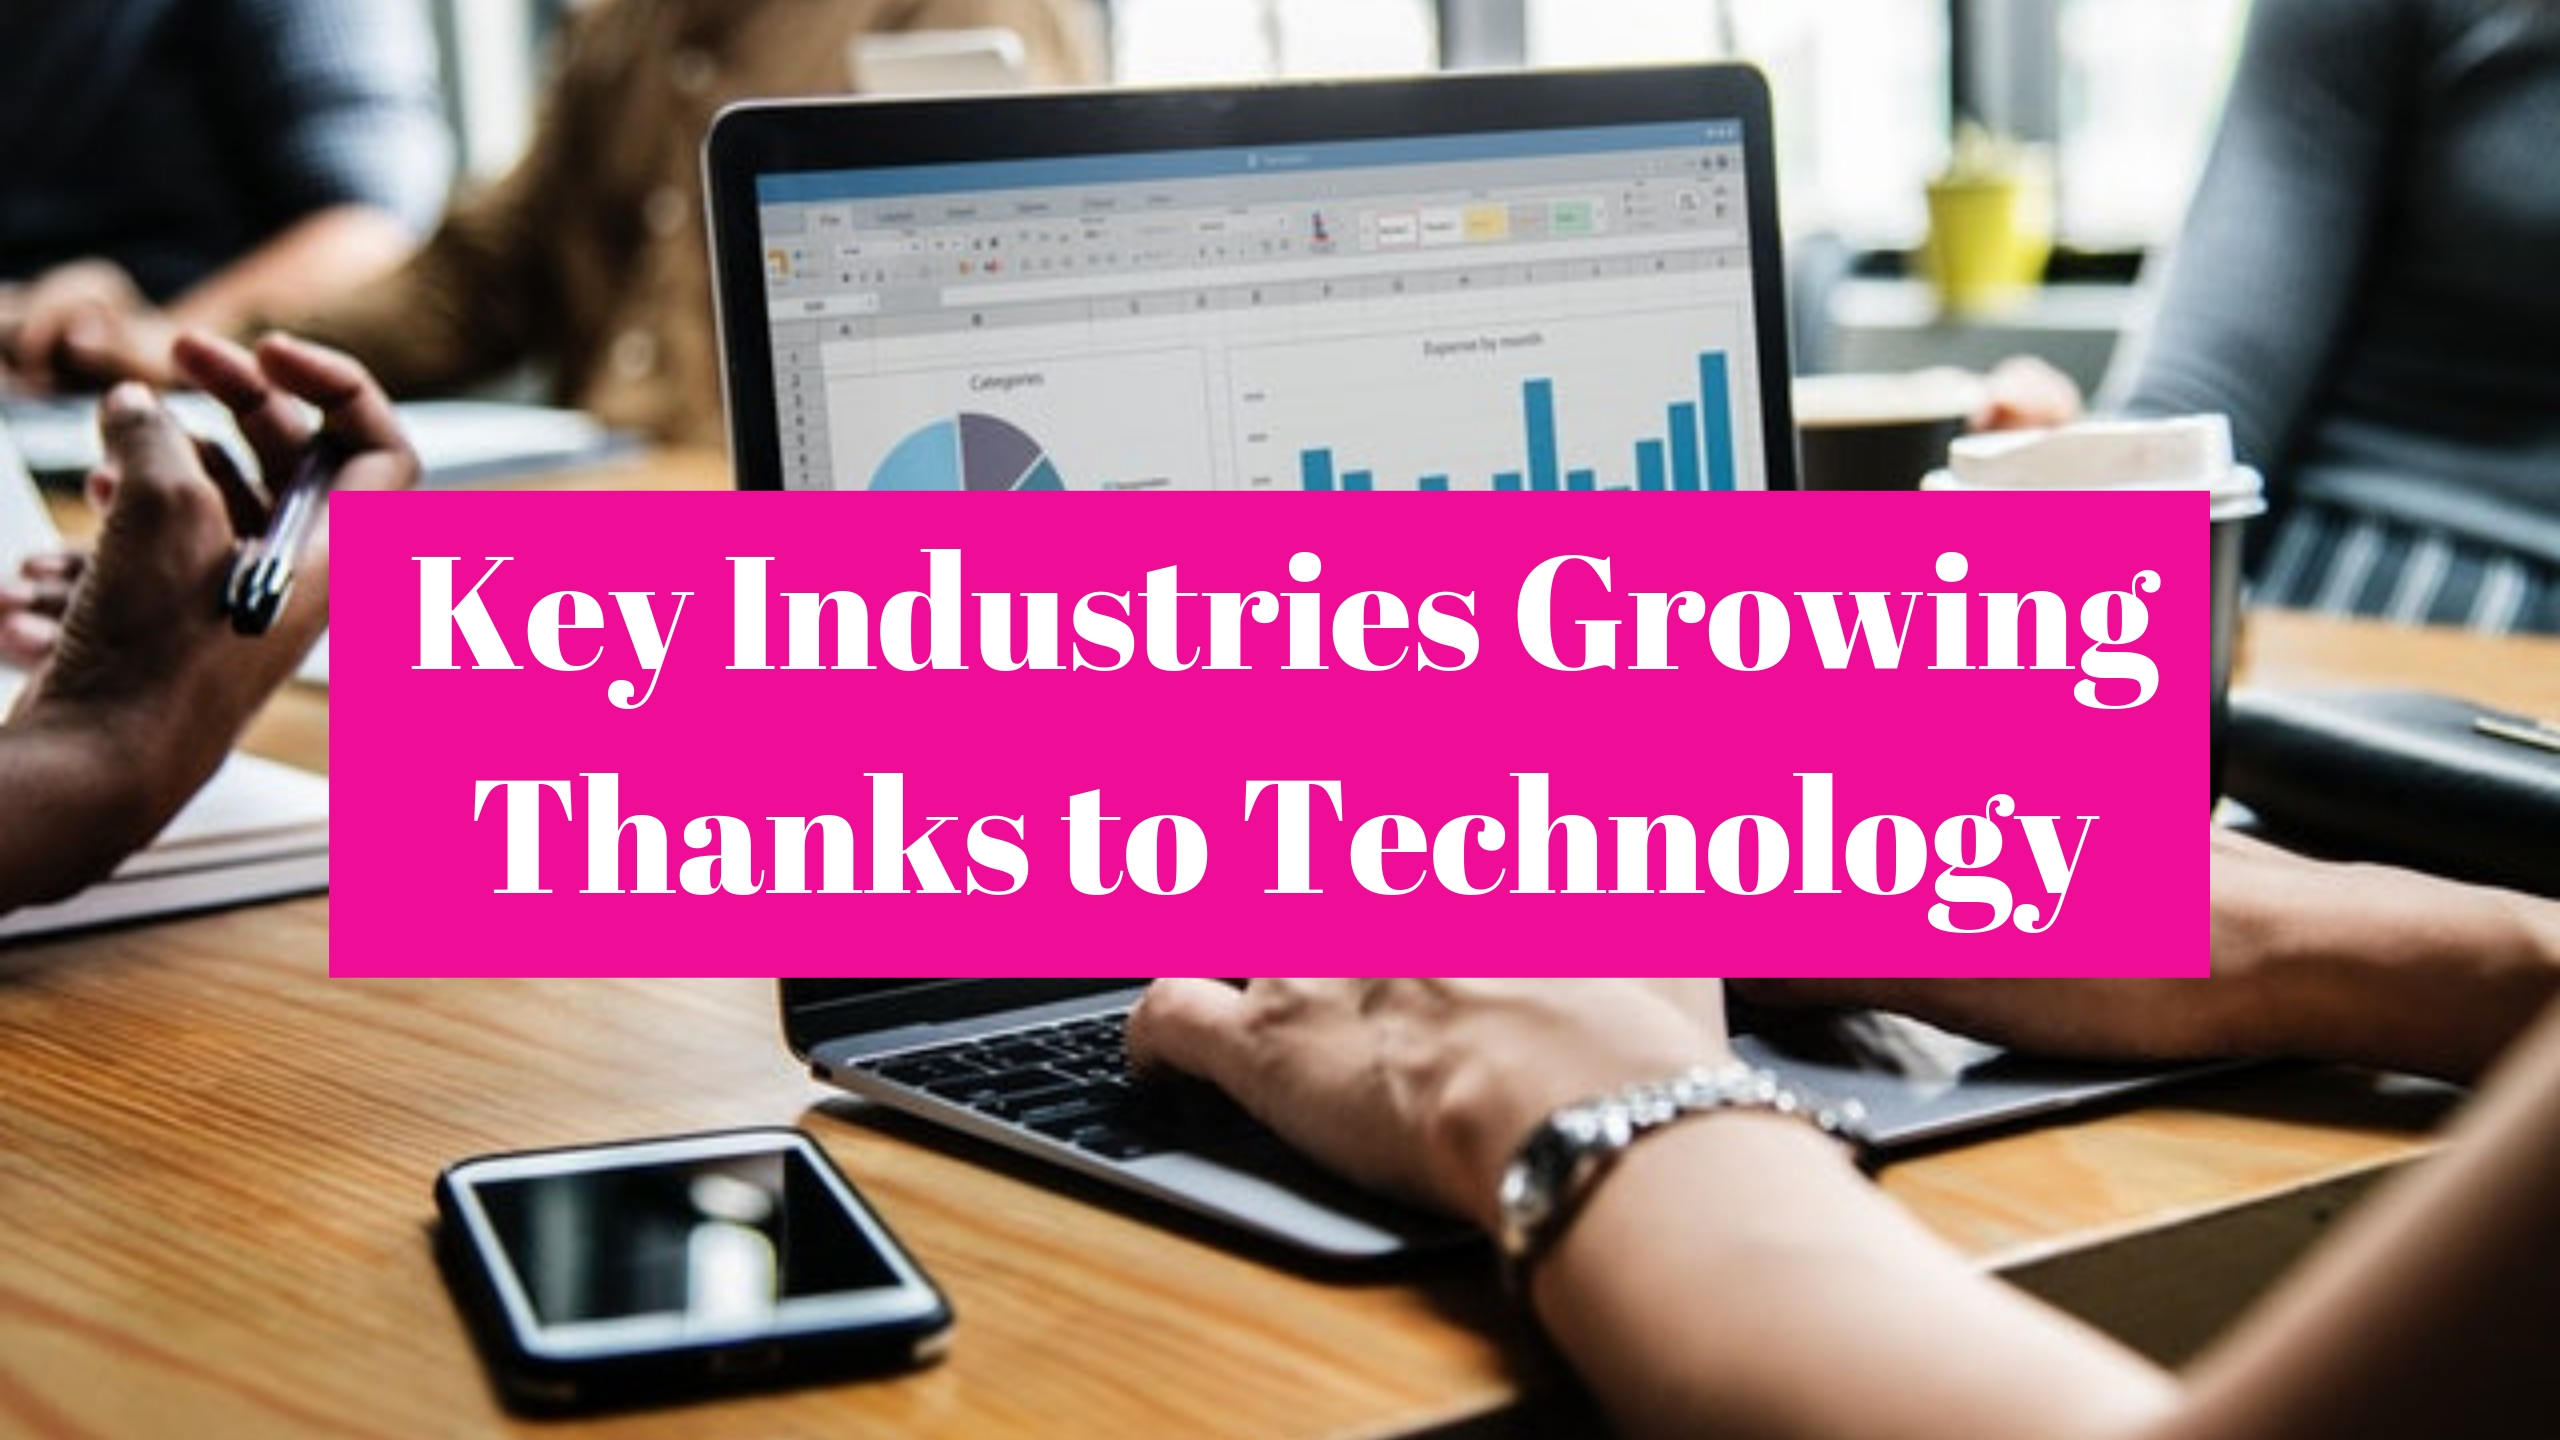 Key Industries Growing Thanks to Technology